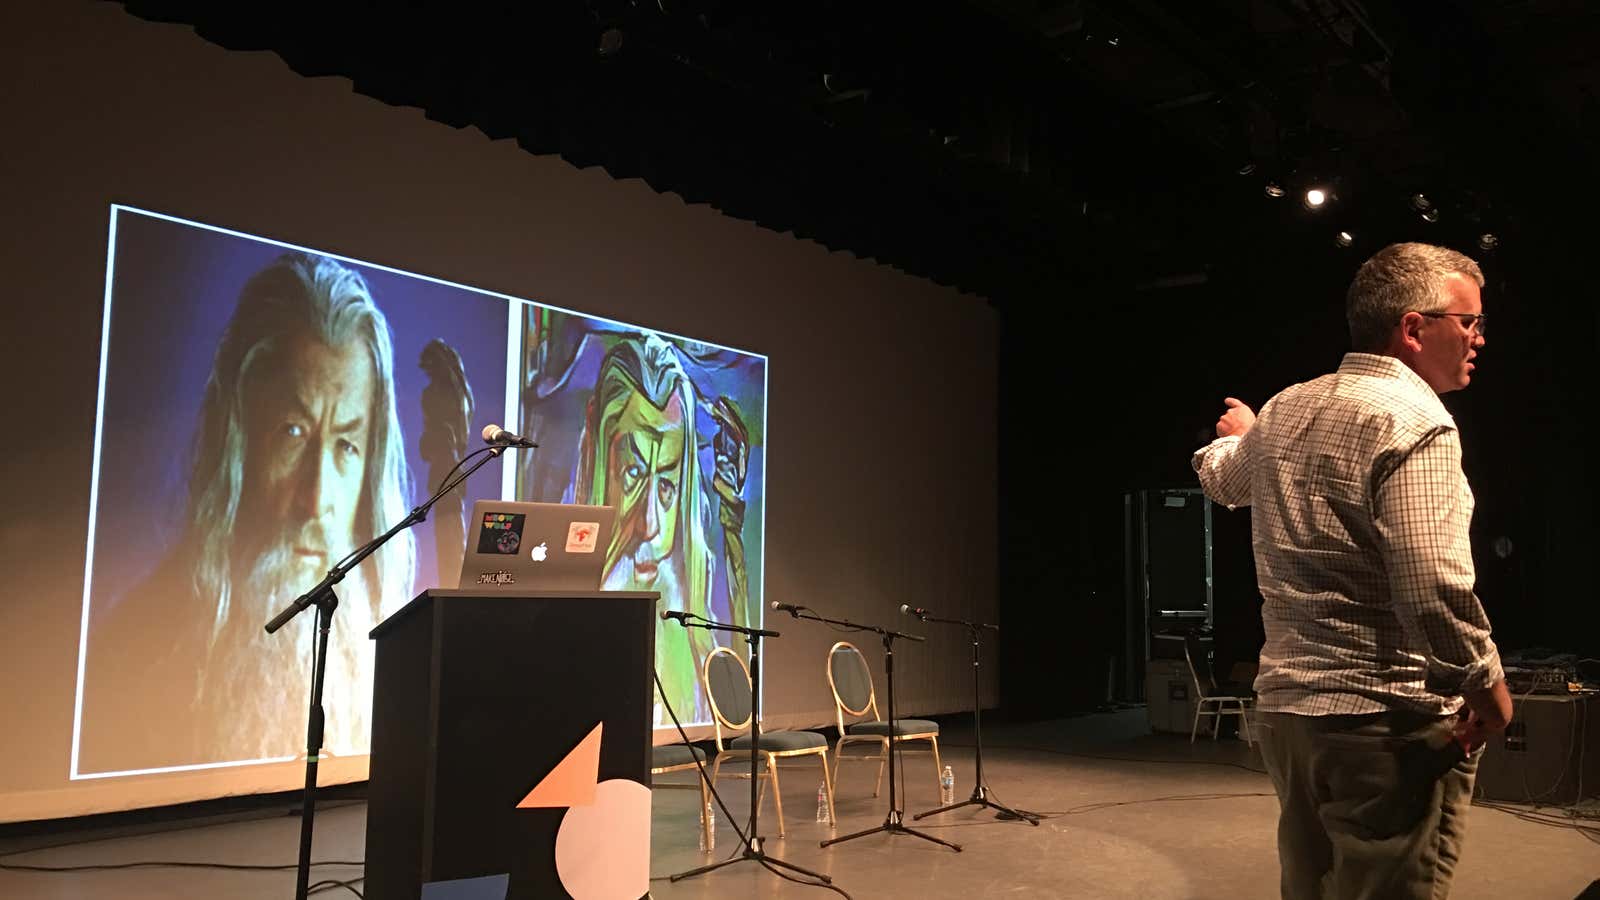 Google researcher Douglas Eck showing off an AI-generated image at Moogfest.